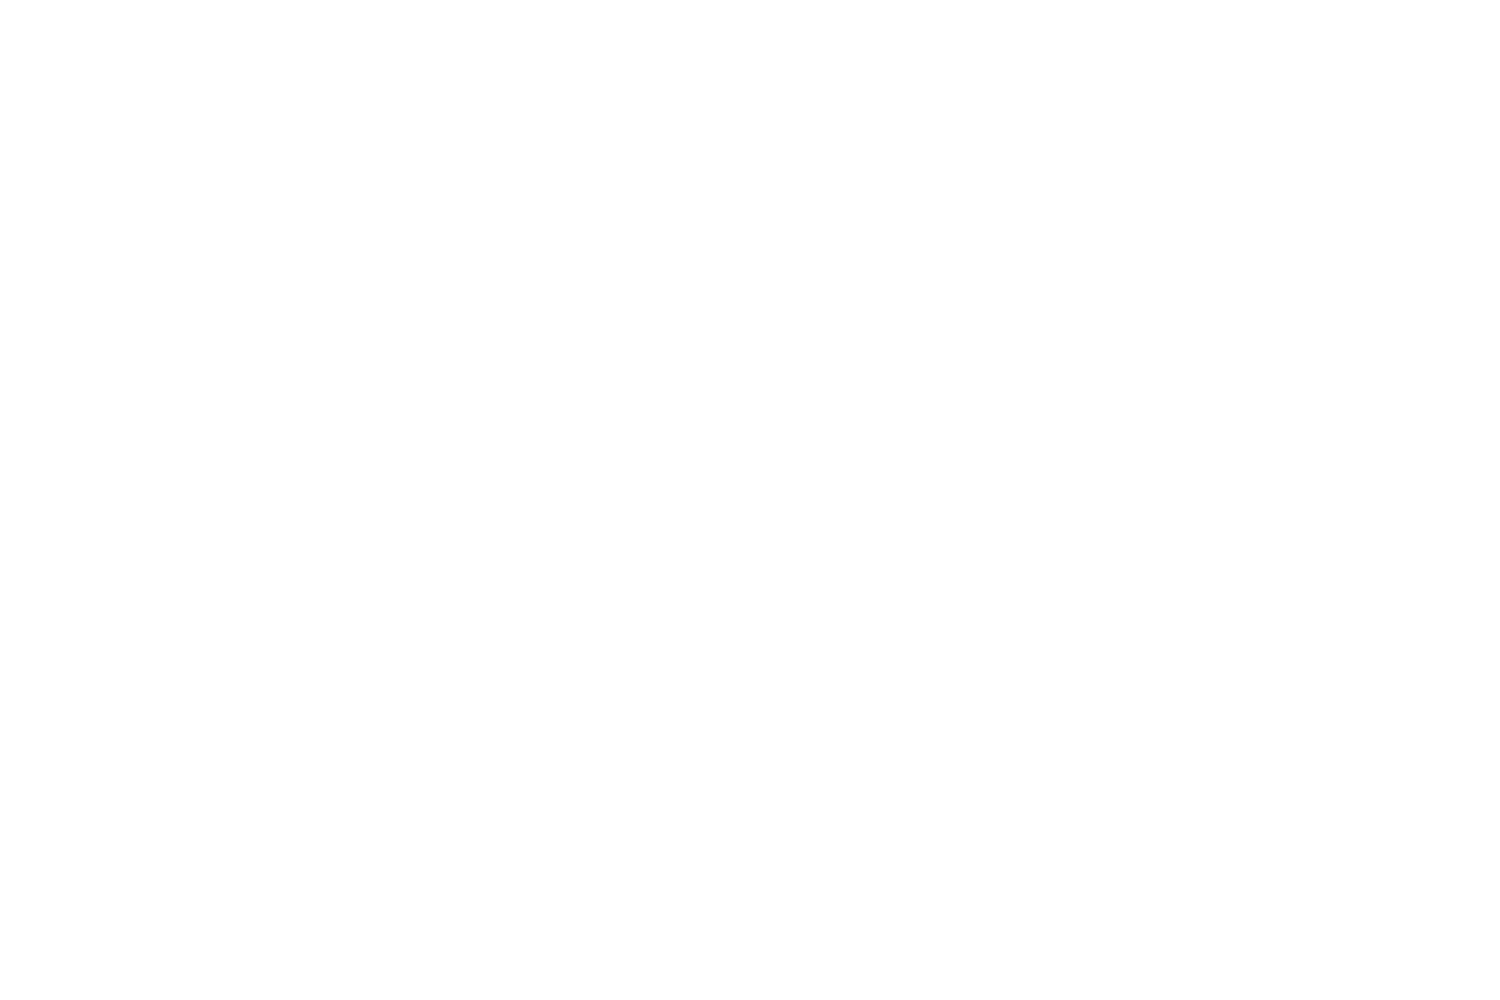 SYDNEY EVENTS GROUP